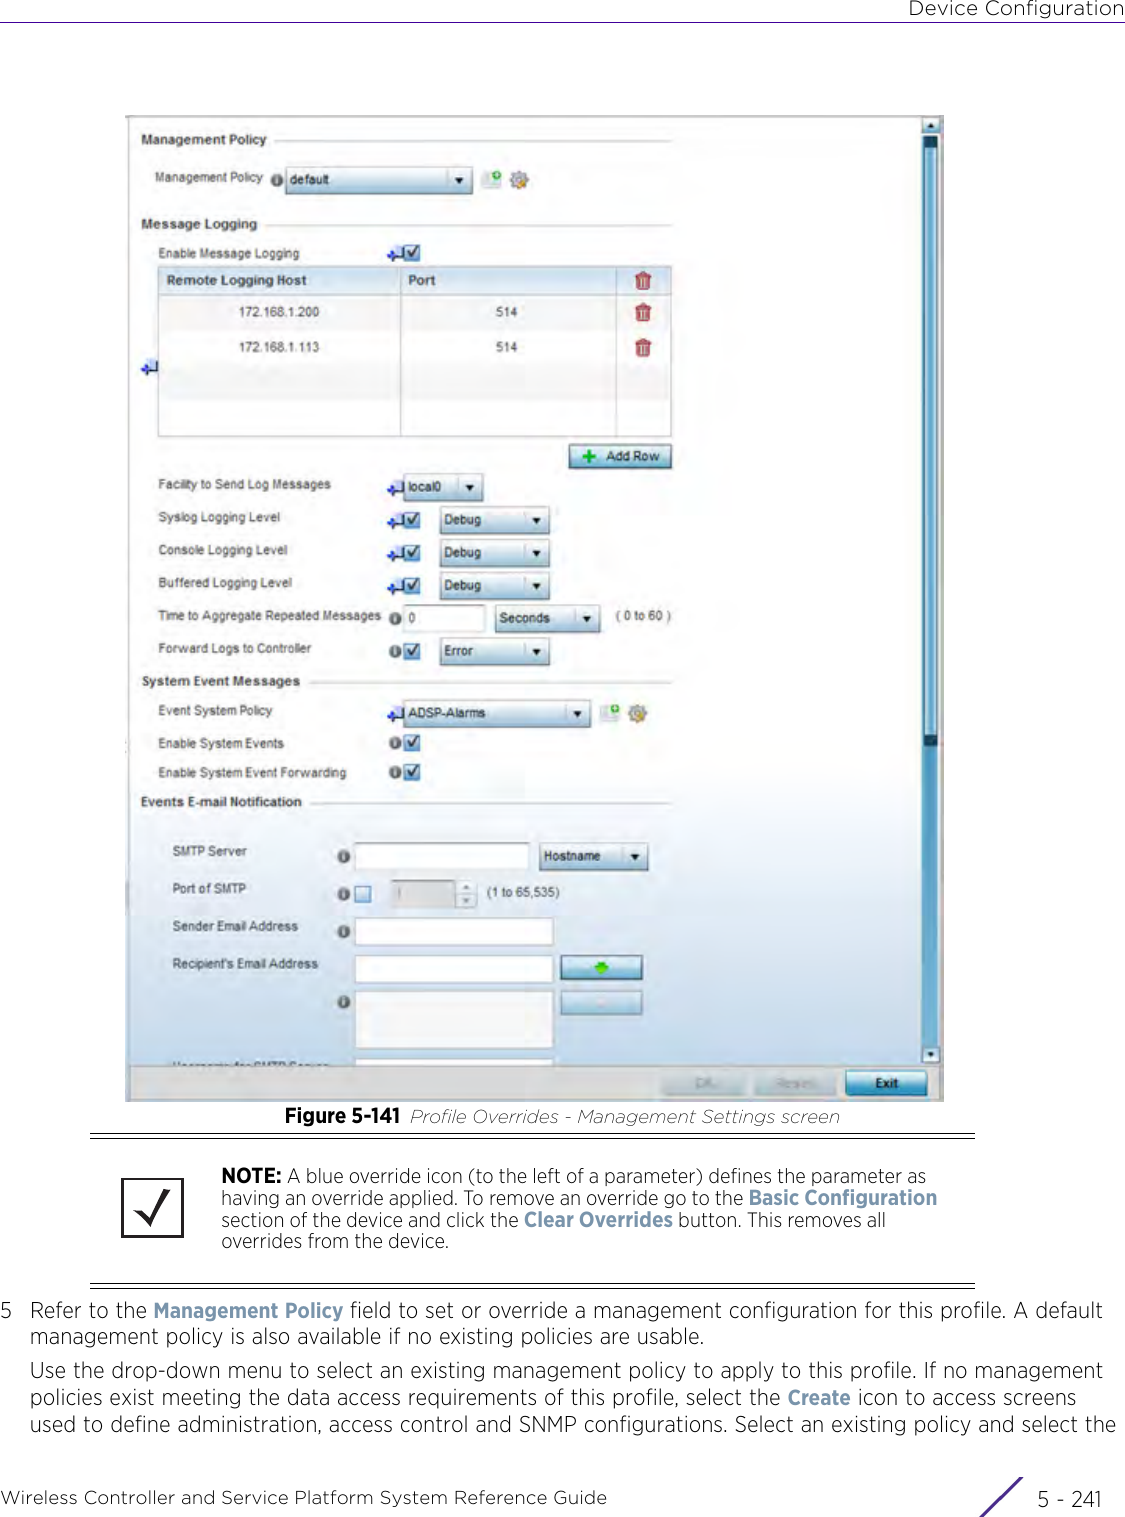 Device ConfigurationWireless Controller and Service Platform System Reference Guide 5 - 241Figure 5-141 Profile Overrides - Management Settings screen5 Refer to the Management Policy field to set or override a management configuration for this profile. A default management policy is also available if no existing policies are usable.Use the drop-down menu to select an existing management policy to apply to this profile. If no management policies exist meeting the data access requirements of this profile, select the Create icon to access screens used to define administration, access control and SNMP configurations. Select an existing policy and select the NOTE: A blue override icon (to the left of a parameter) defines the parameter as having an override applied. To remove an override go to the Basic Configuration section of the device and click the Clear Overrides button. This removes all overrides from the device.